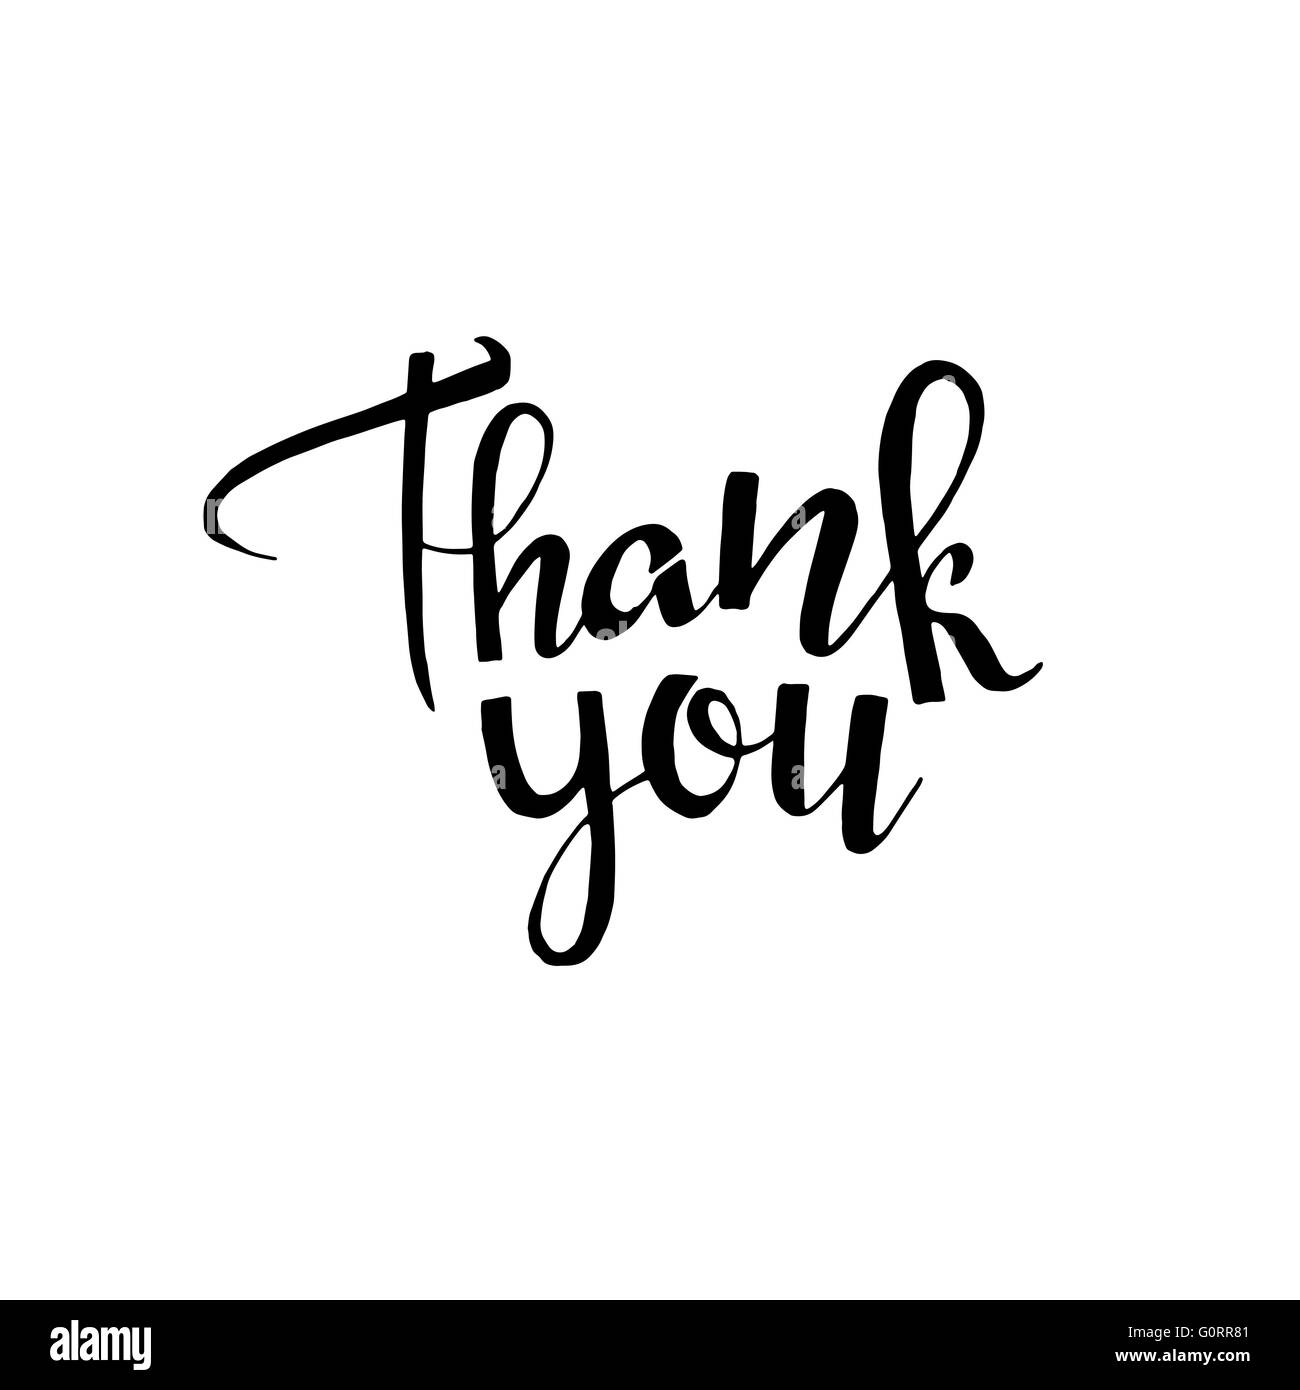 Thank you Black and White Stock Photos & Images - Alamy